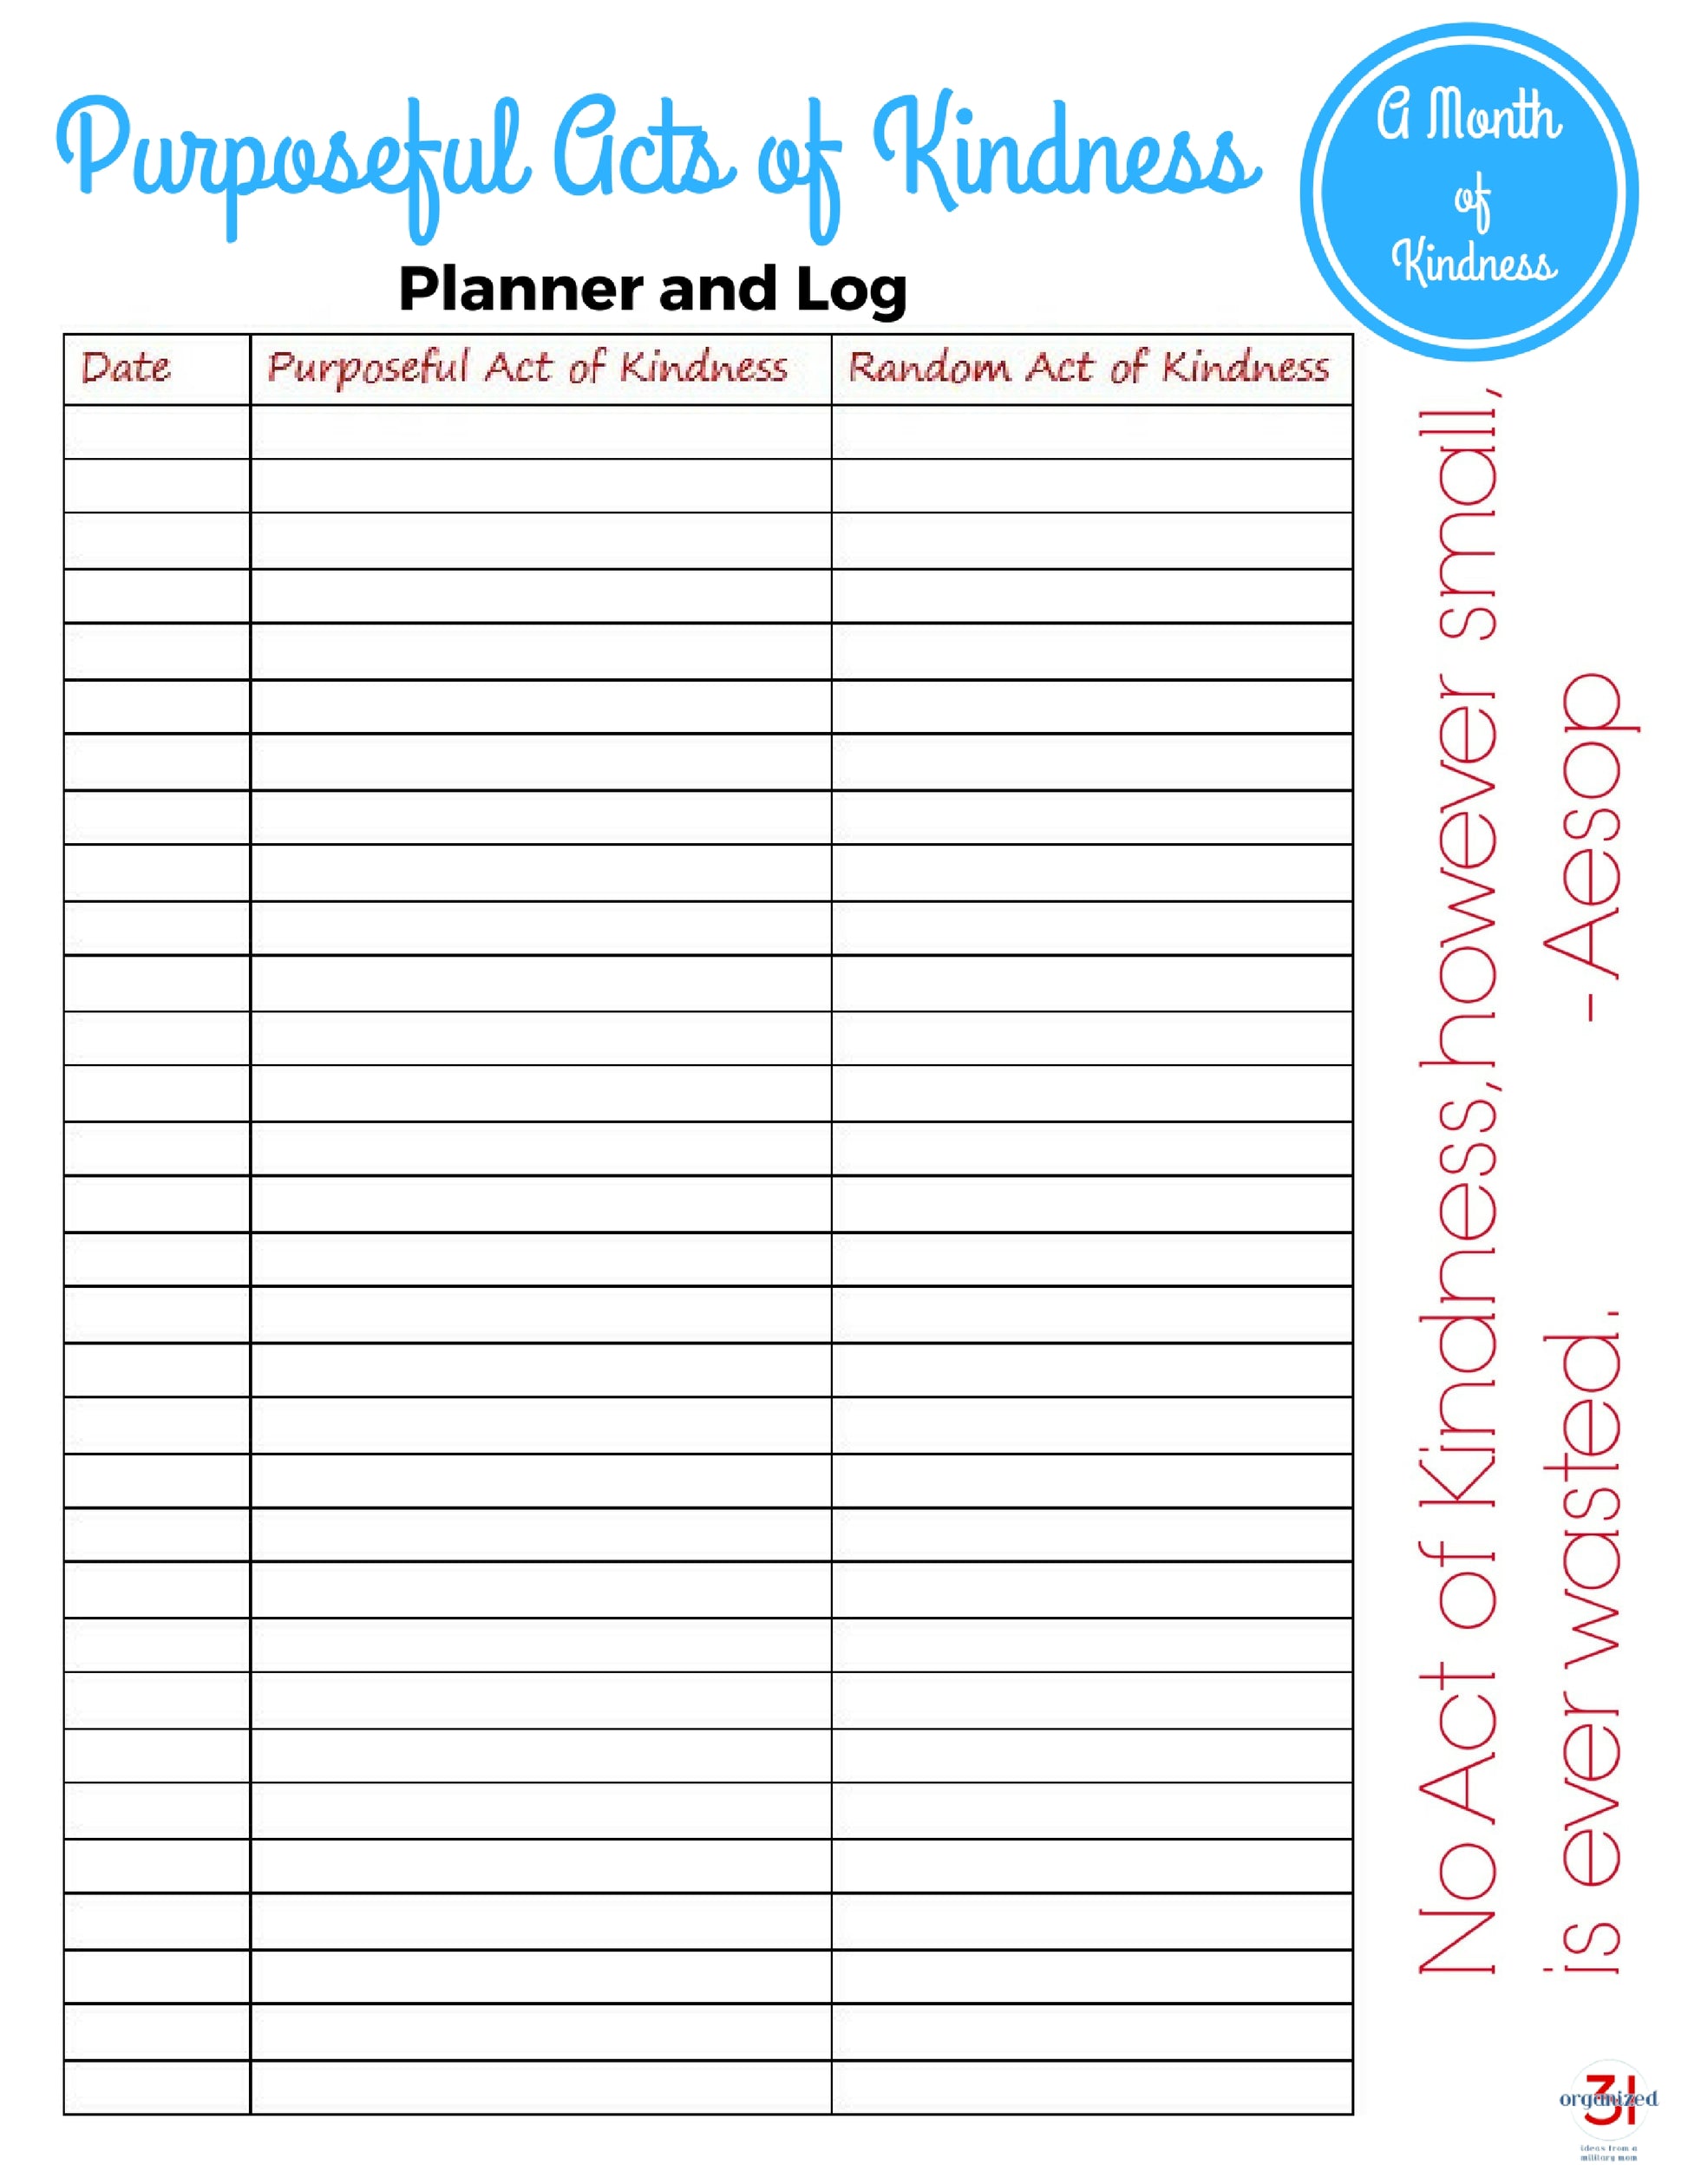 Download a free printable Purposeful Acts of Kindness Planner from Organized 31 Shop and log to track your generous deeds. Don't forget to subscribe to our newsletter for more inspiring content!